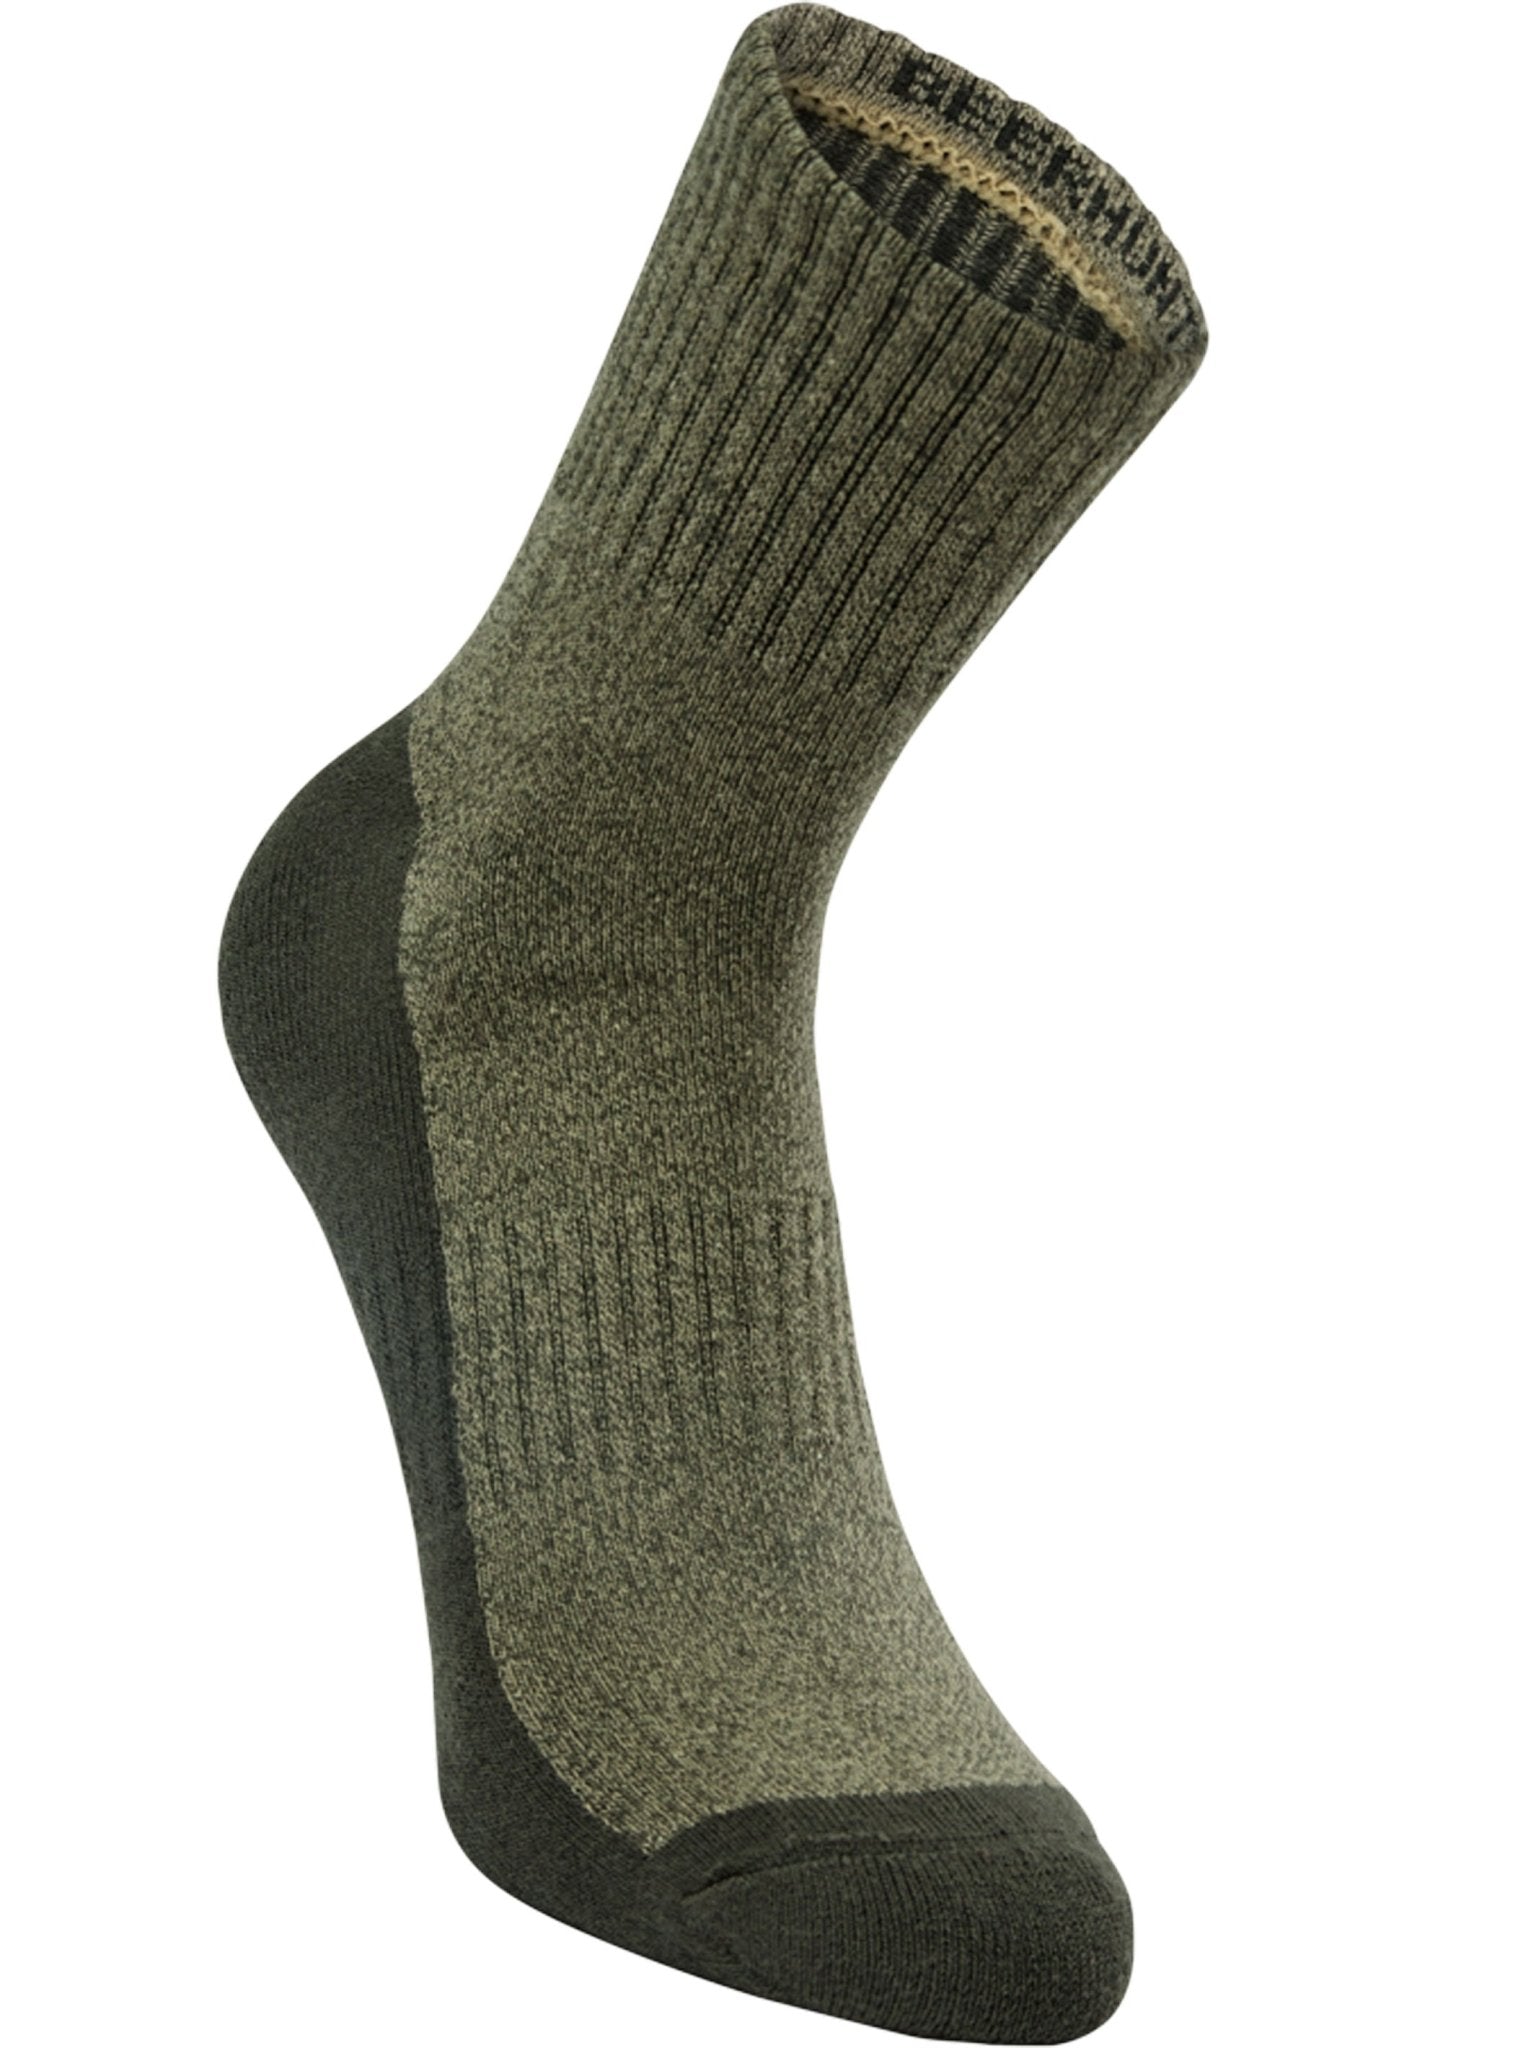 Deerhunter Deerhunter - Hemp Mix Ankle Socks - Terry sole for comfort and shock absorption Ribbed arch support Socks